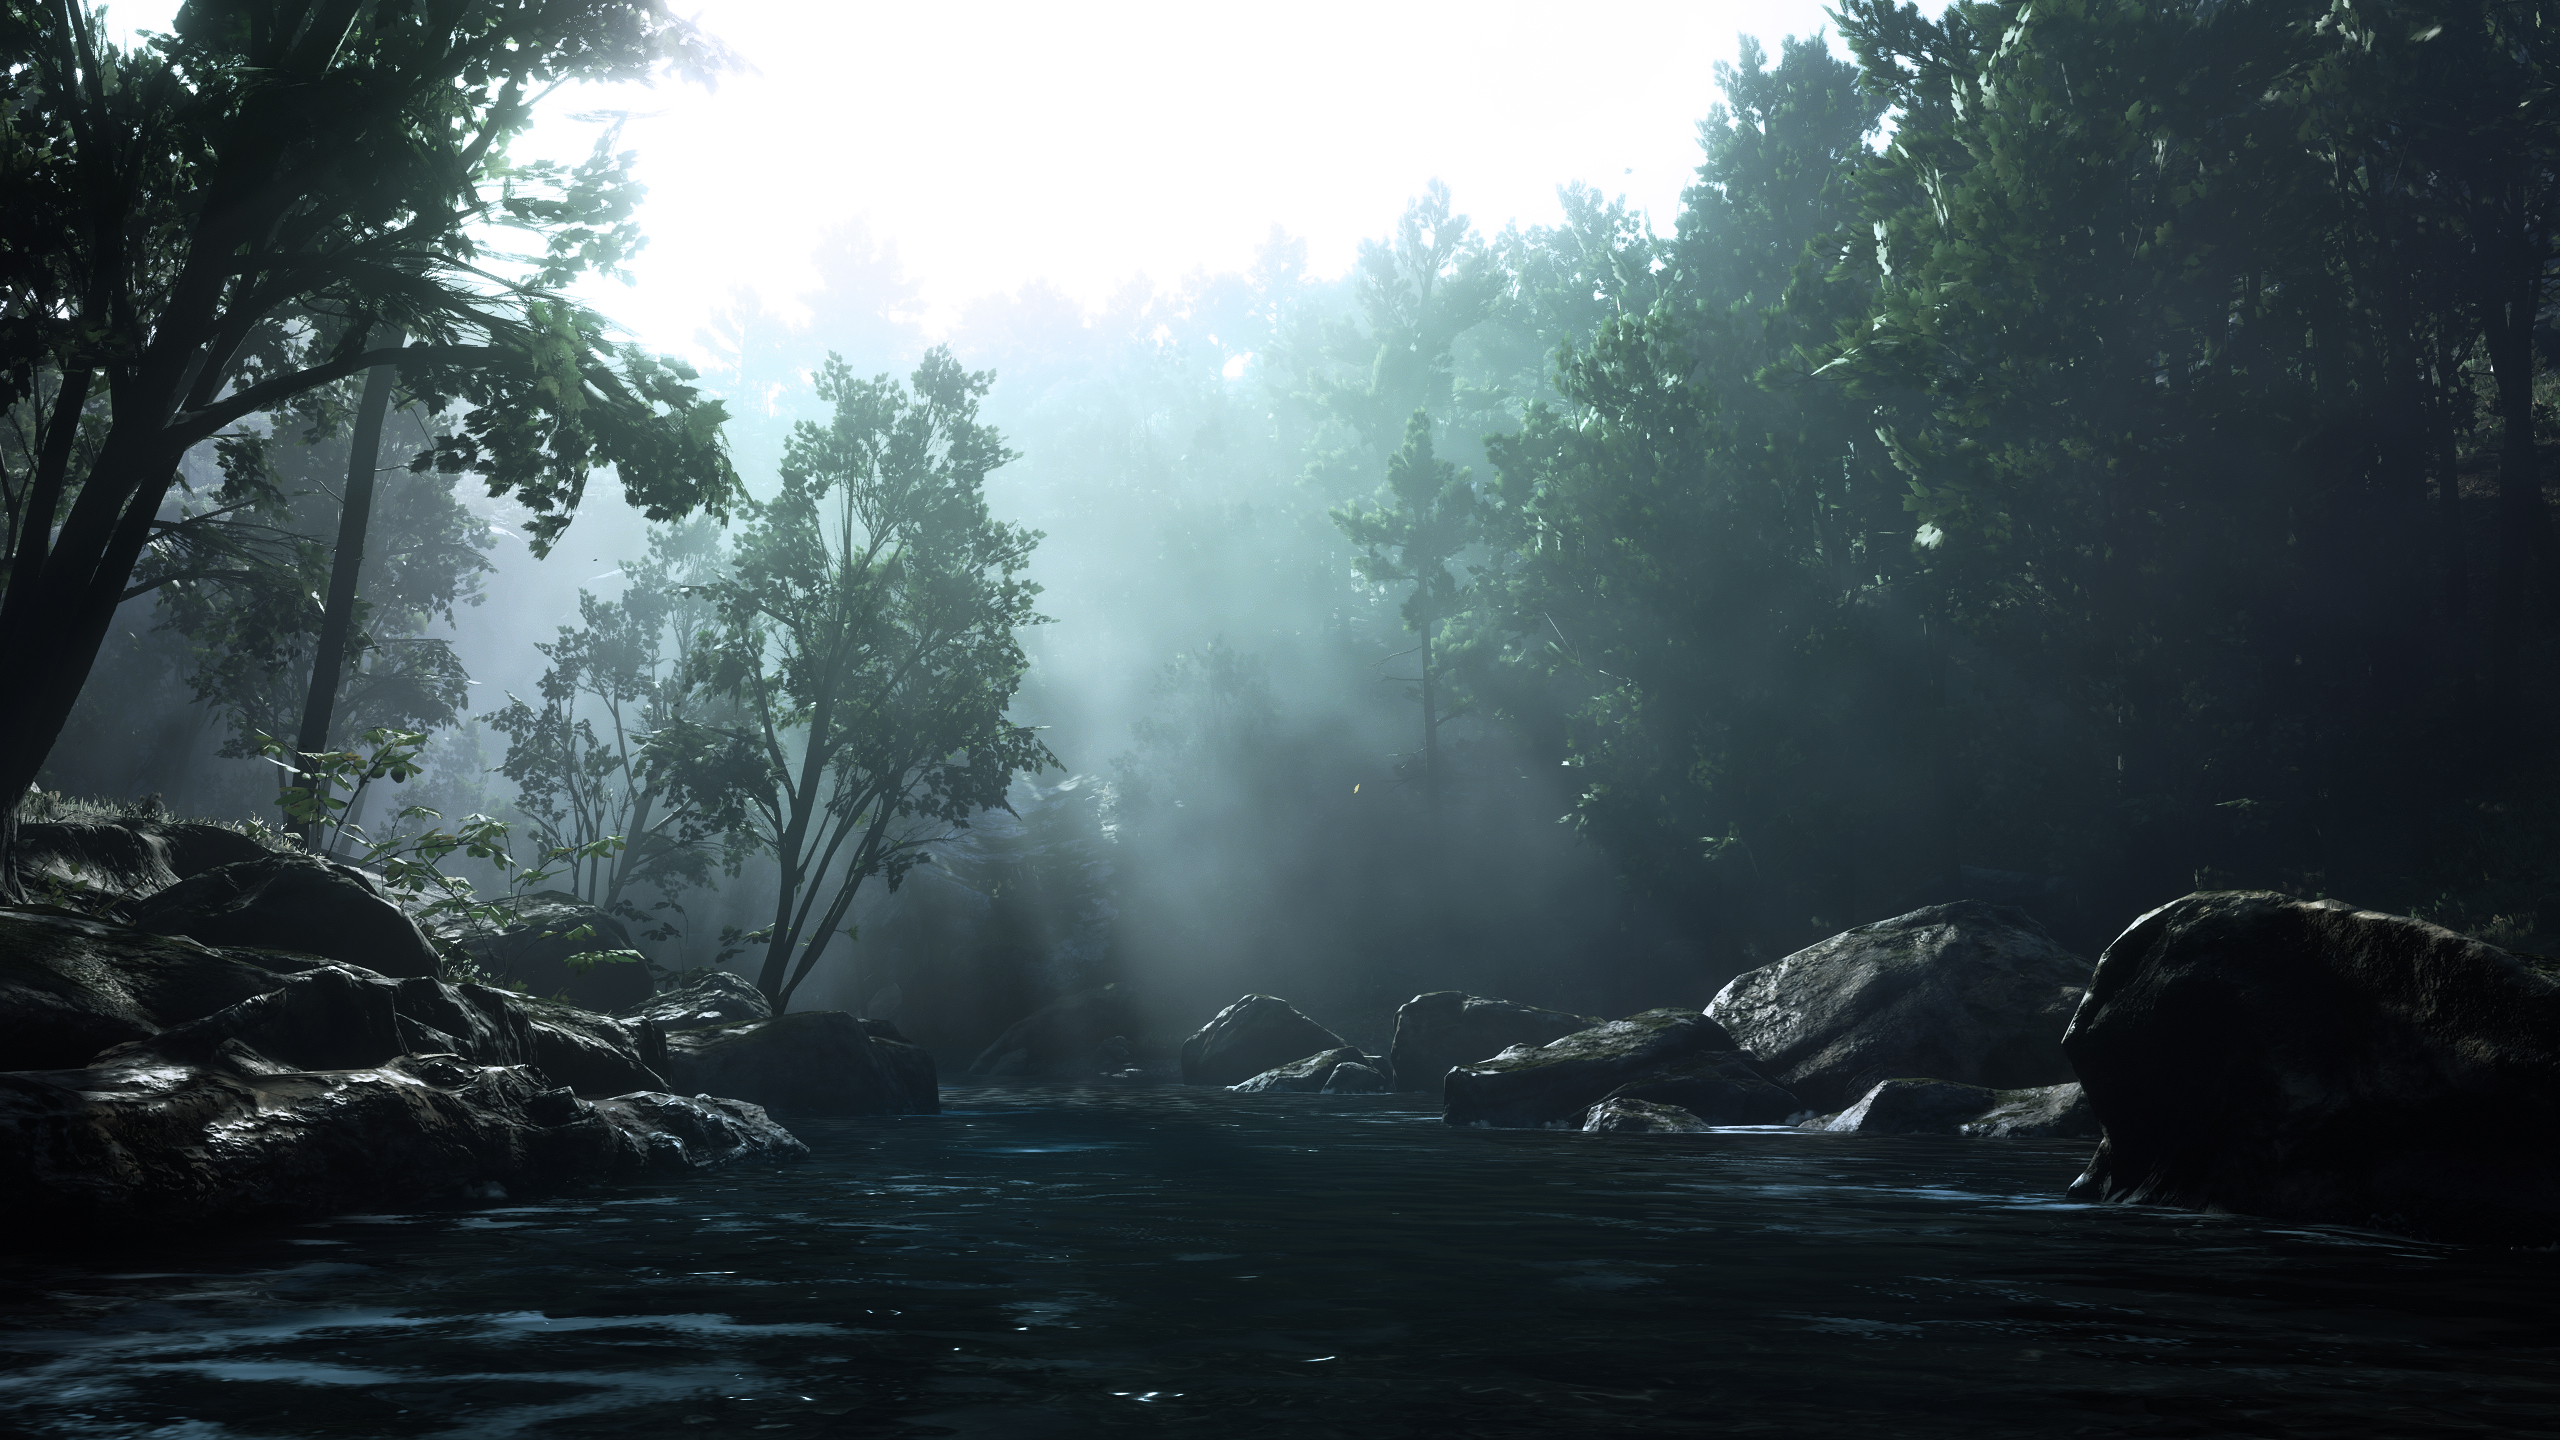 General 2560x1440 Red Dead Redemption 2 mist river nature forest video game art video games trees sunlight water CGI rocks